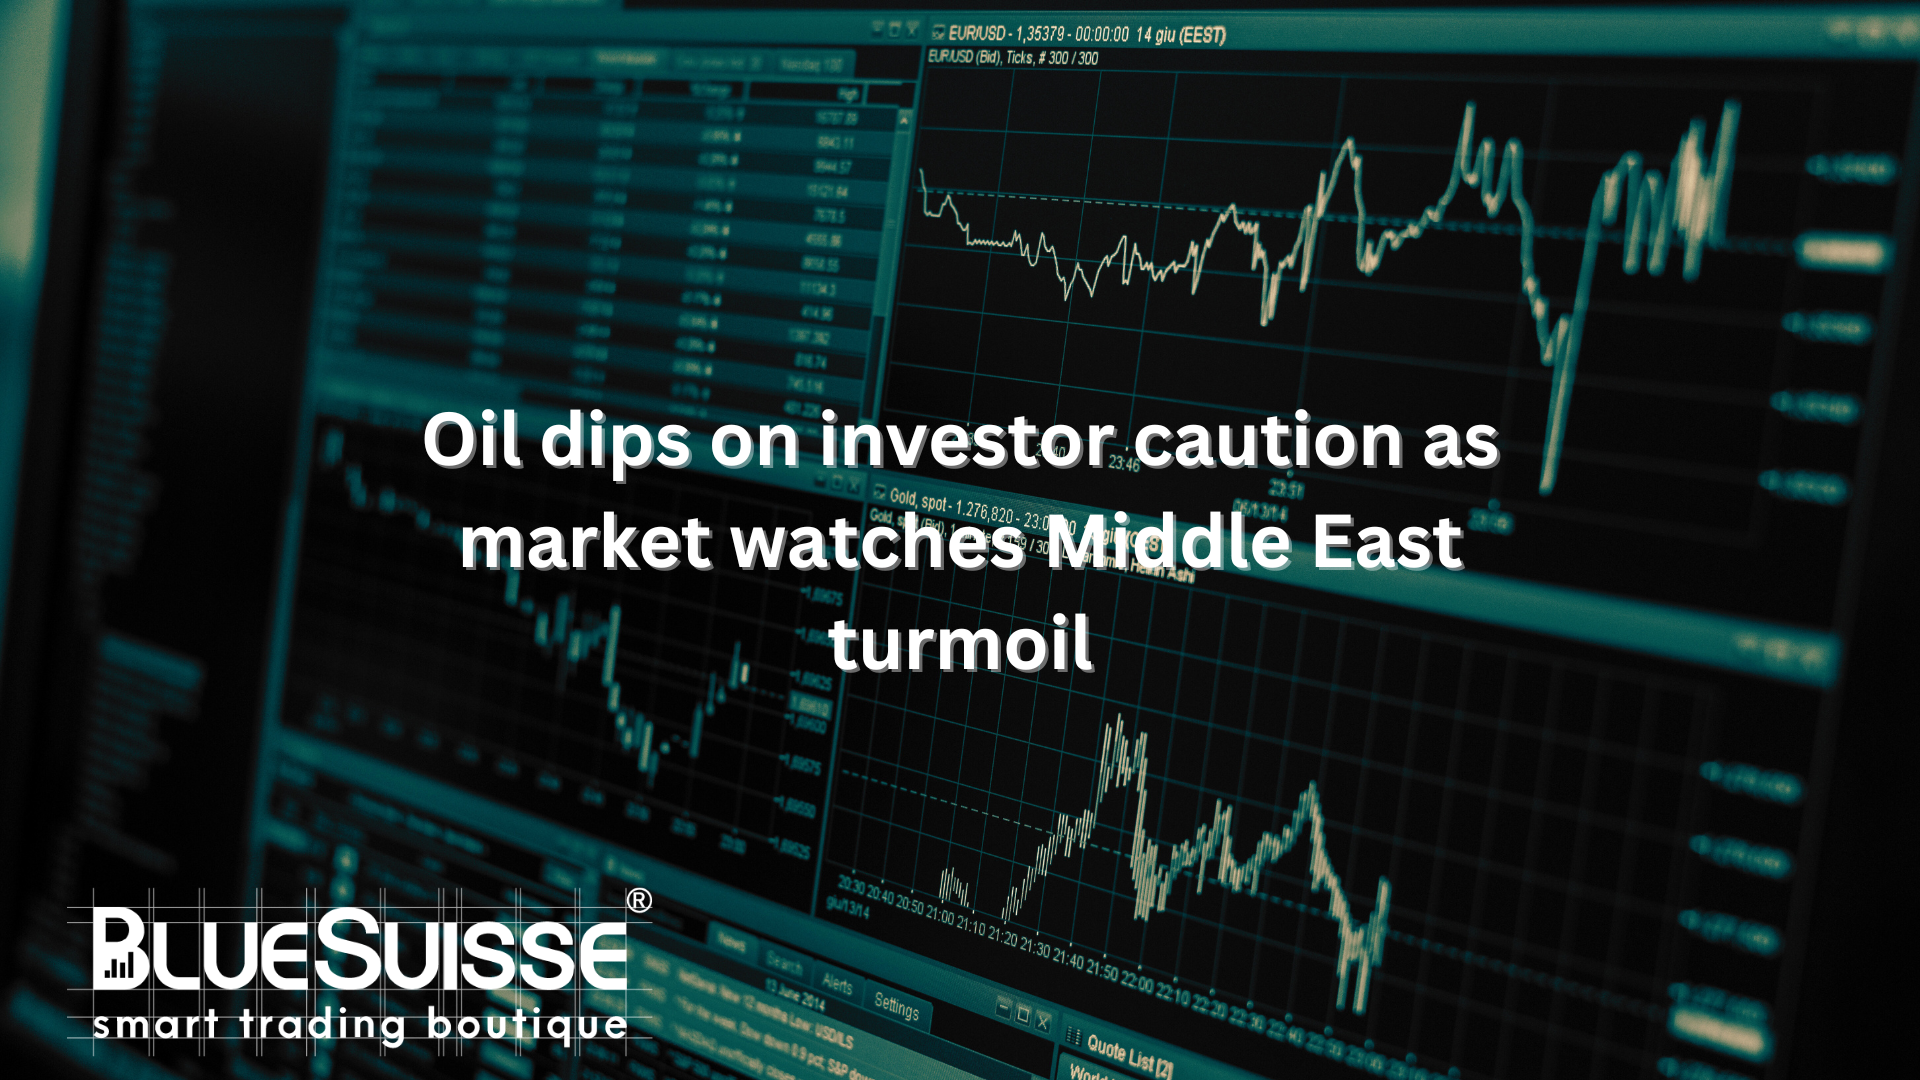 Oil dips on investor caution as market watches Middle East turmoil